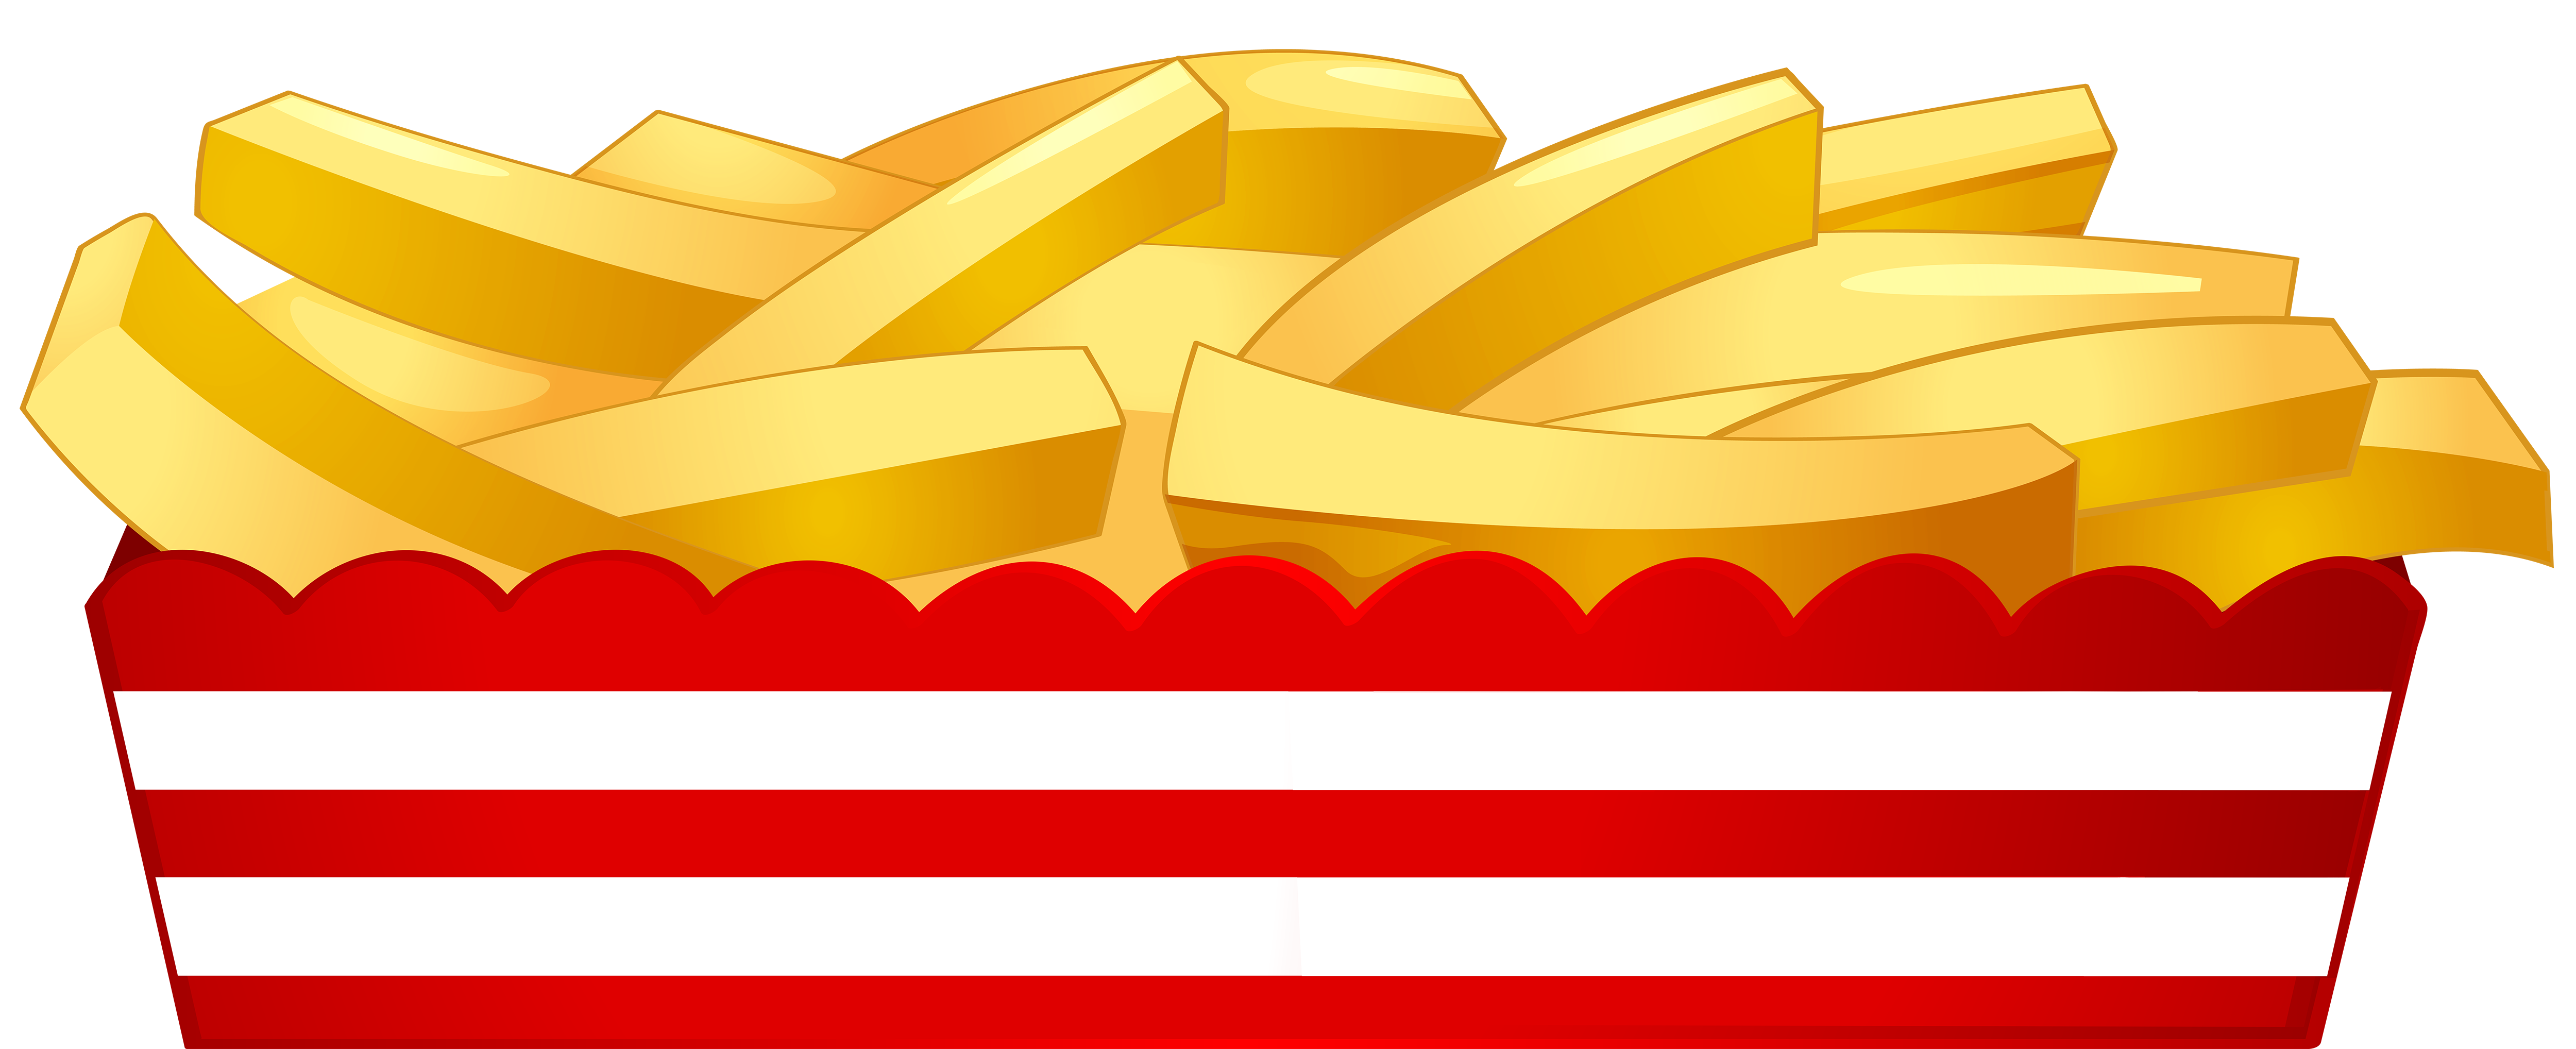 French fry clipart free - ClipartFest